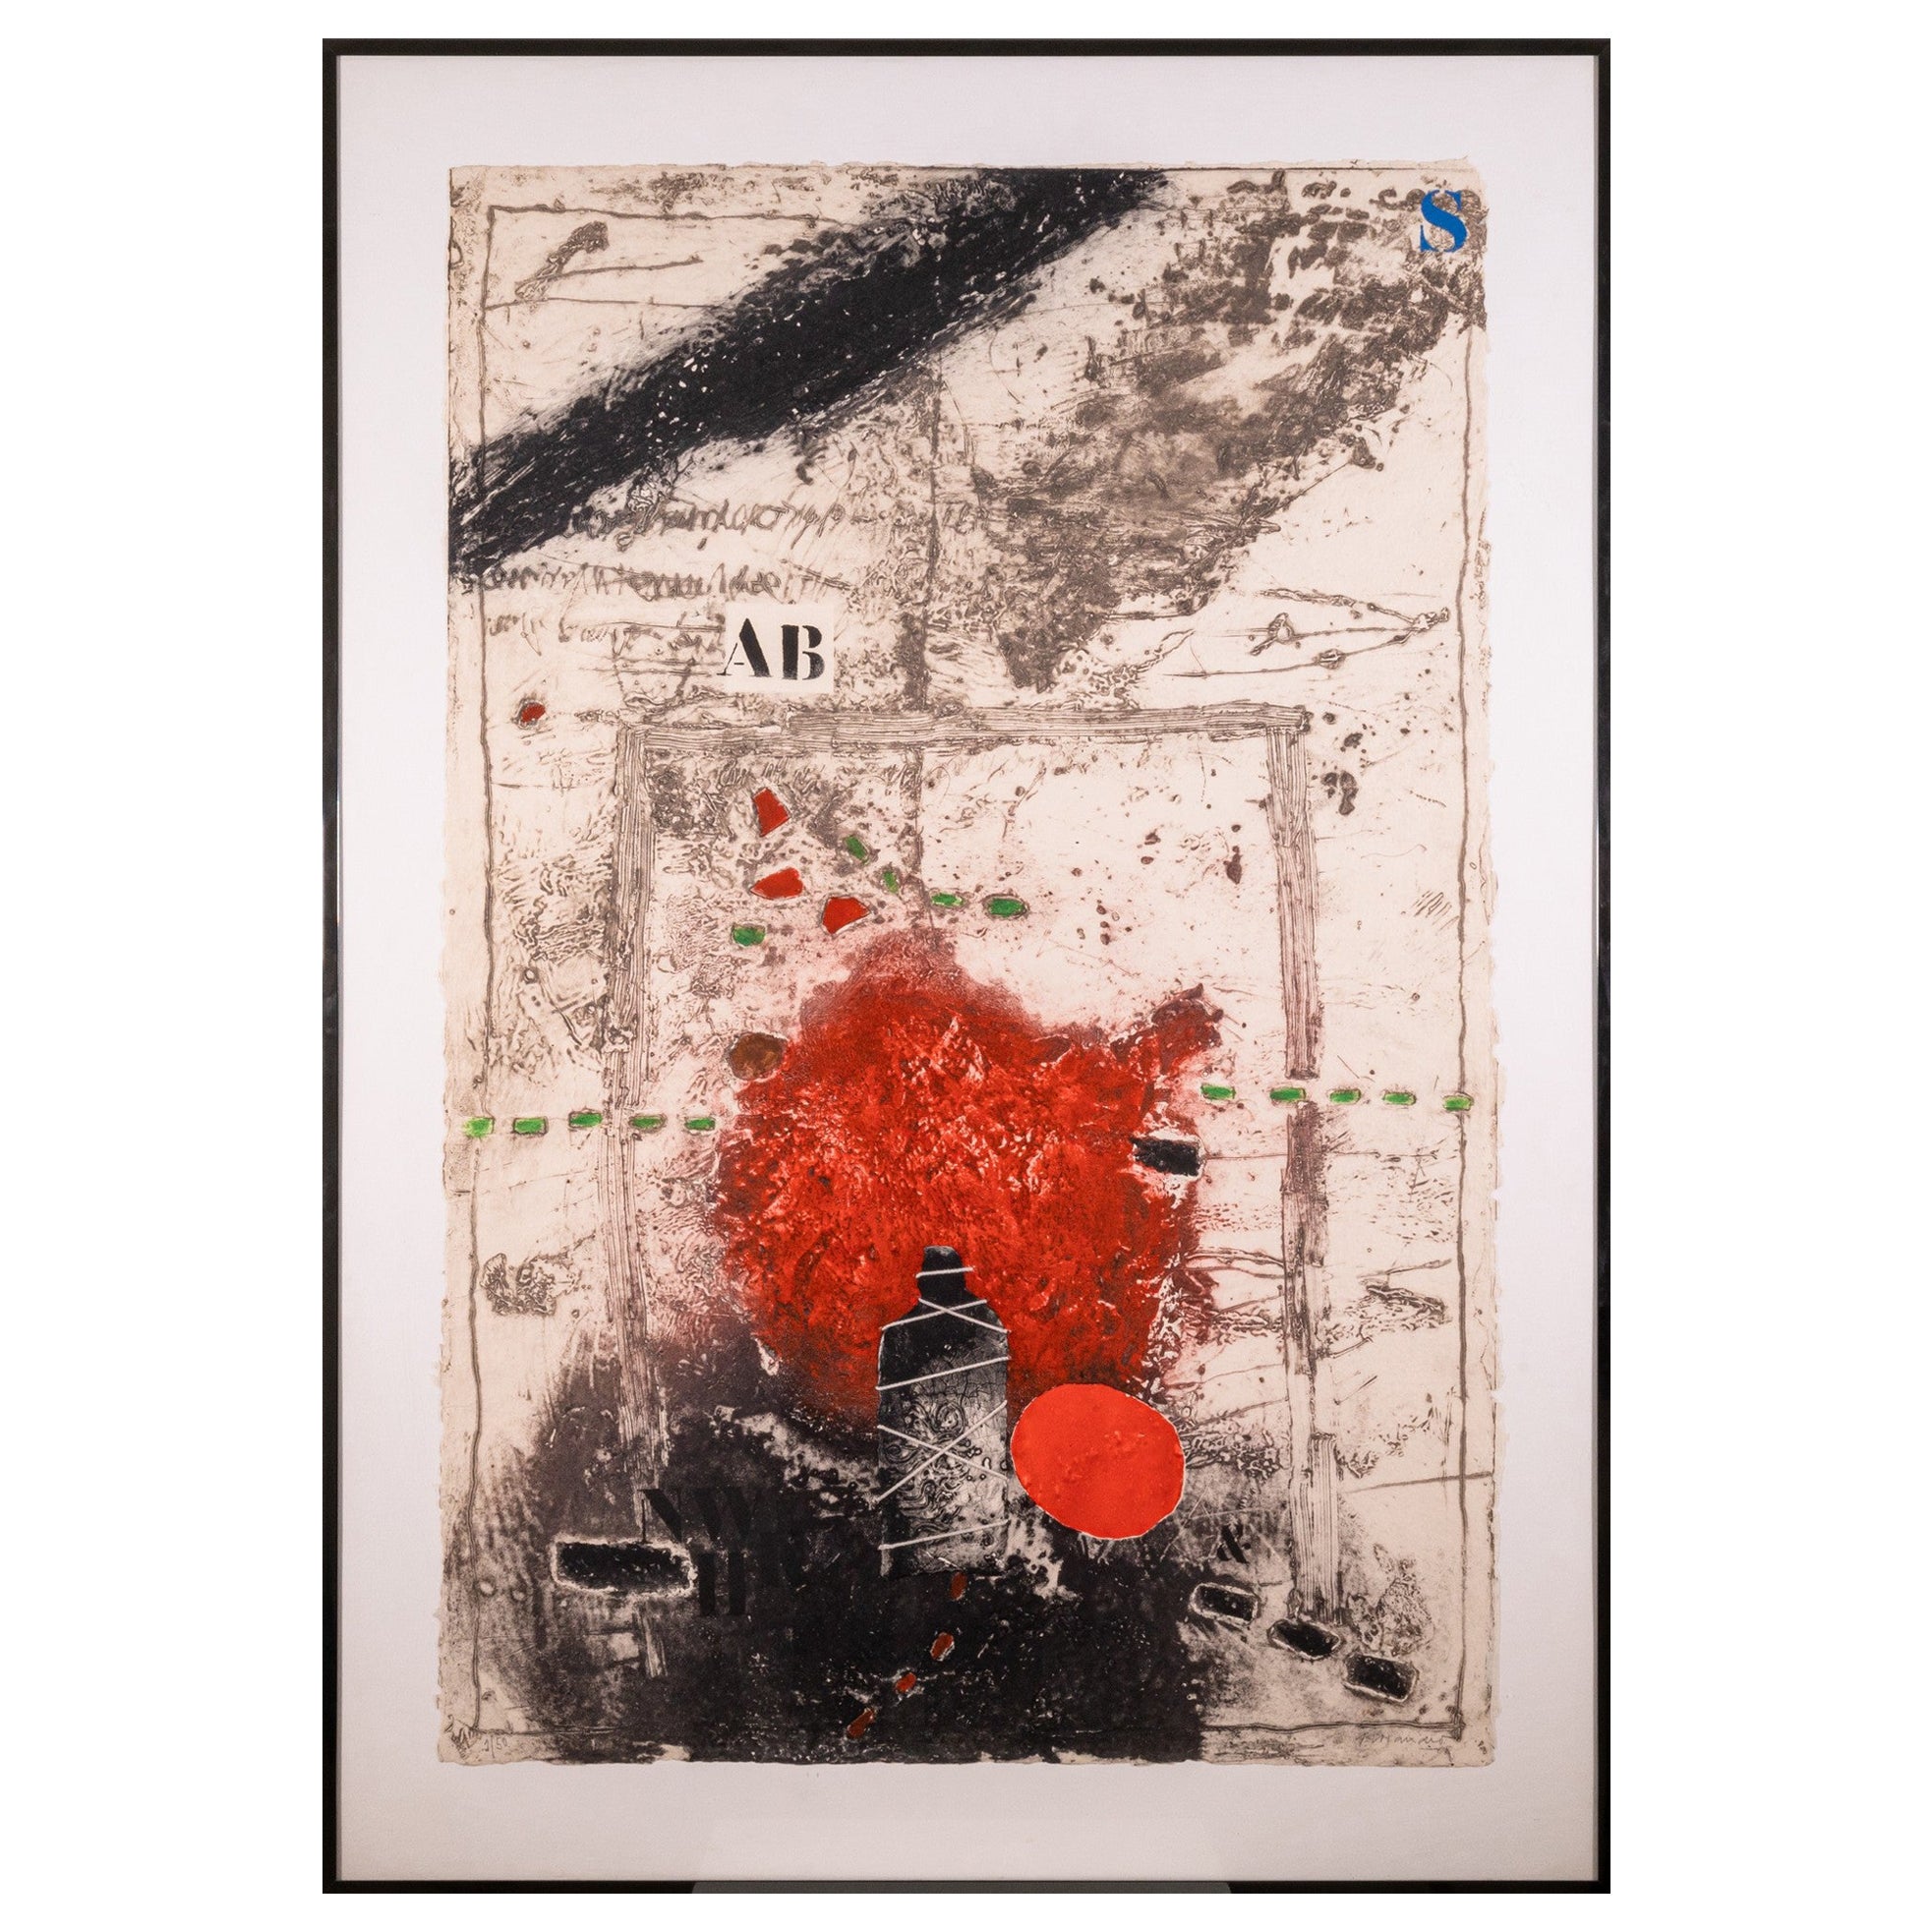 James Coignard Signed Carborundum Etching on Paper from Otage et Rouge Series